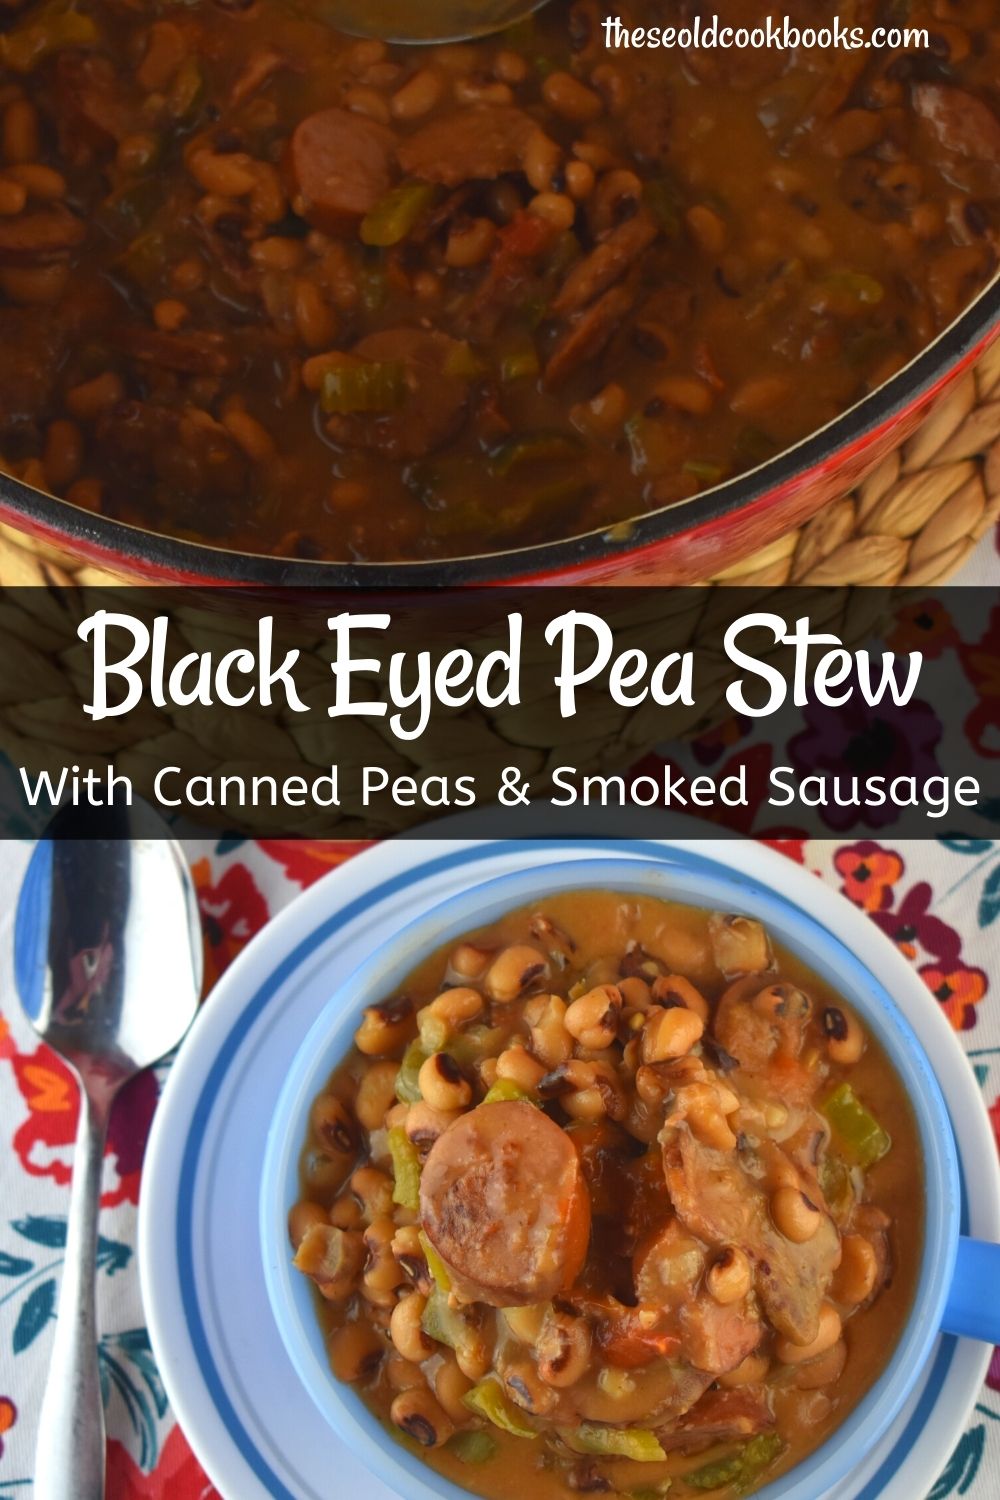 Black-Eyed Peas and Sausage Stew uses canned black-eyed peas and smoked sausage to create the perfect winter stew recipe with all the classic flavors of Louisiana.